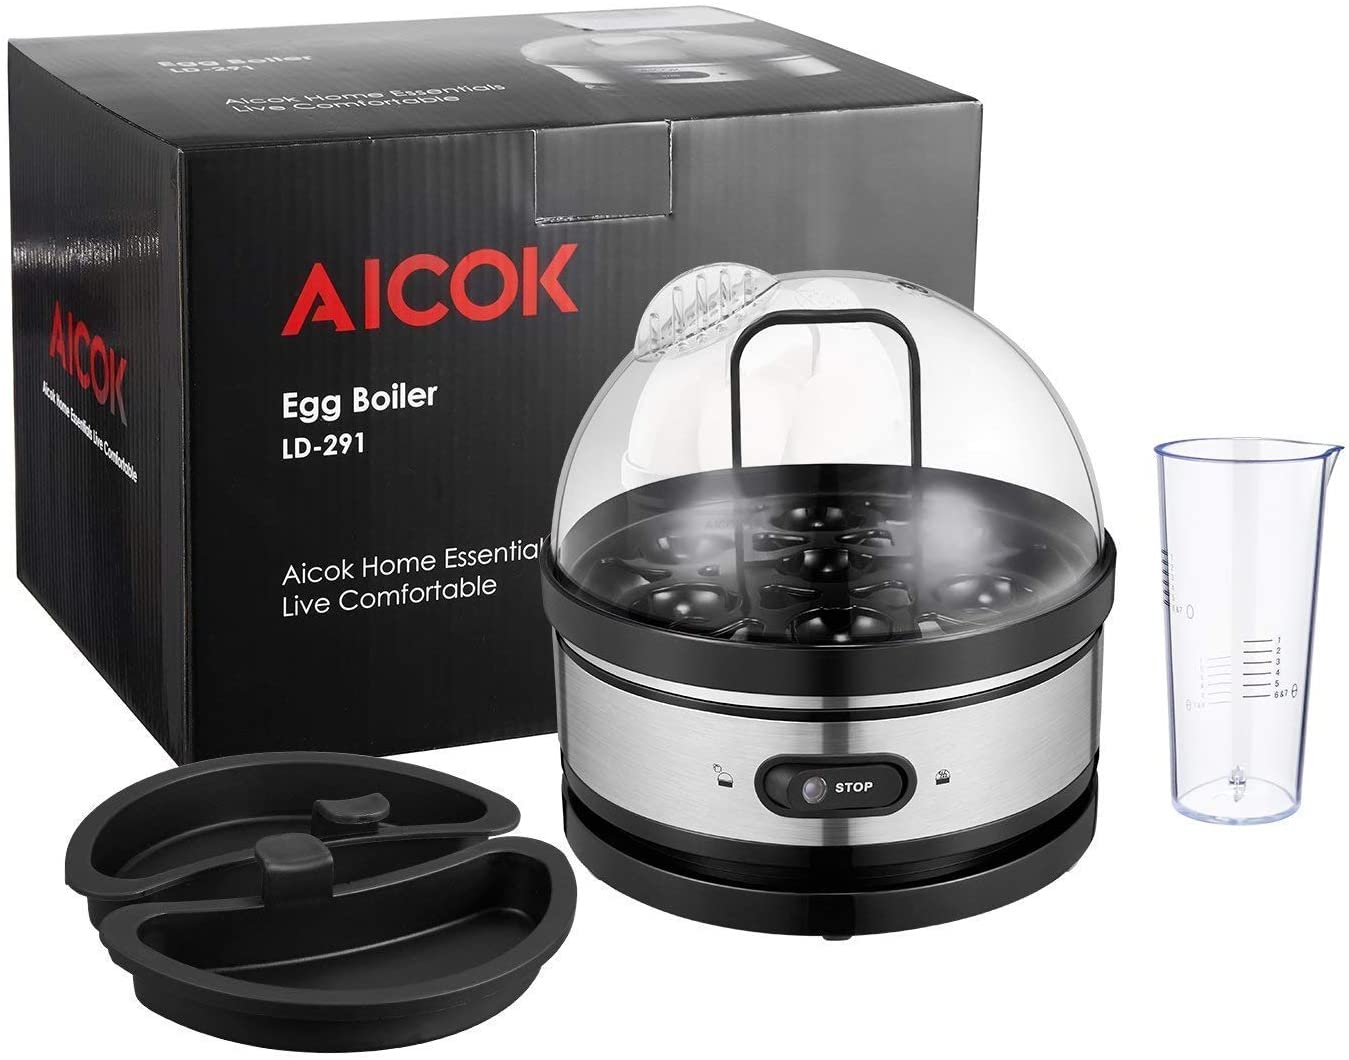 Electric Rapid Stainless Steel 7 Egg cooker Auto Shut Off – Modern